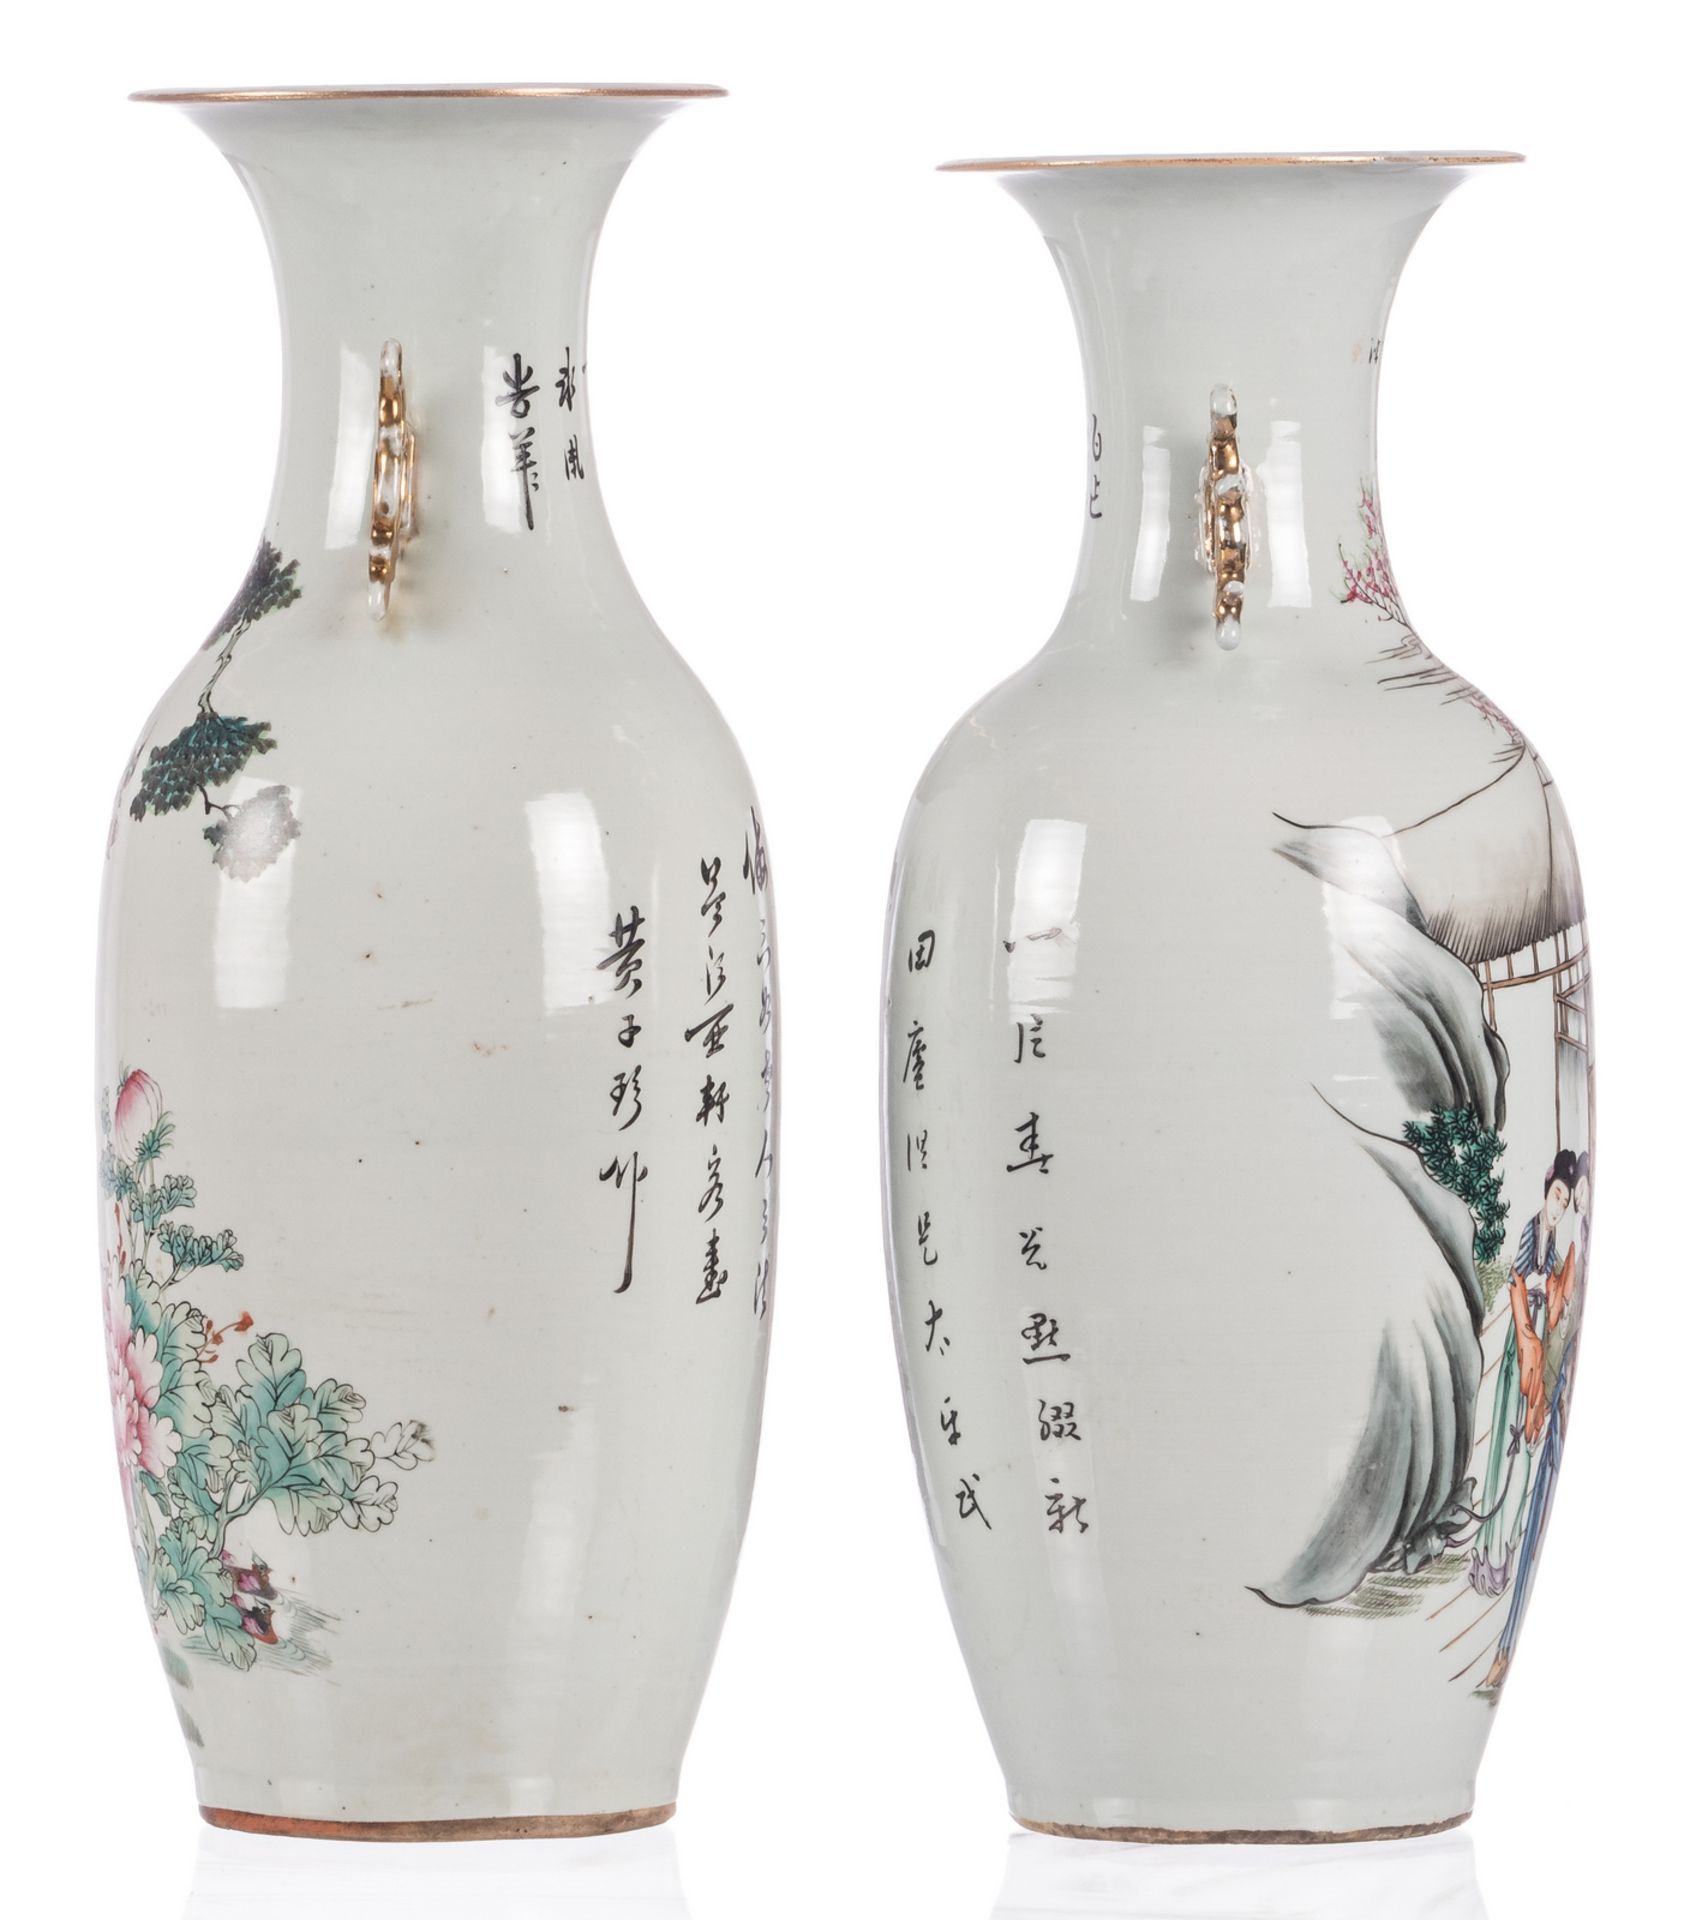 Two Chinese famille rose vases, one vase decorated with an animated scene and calligraphic texts and - Image 3 of 6